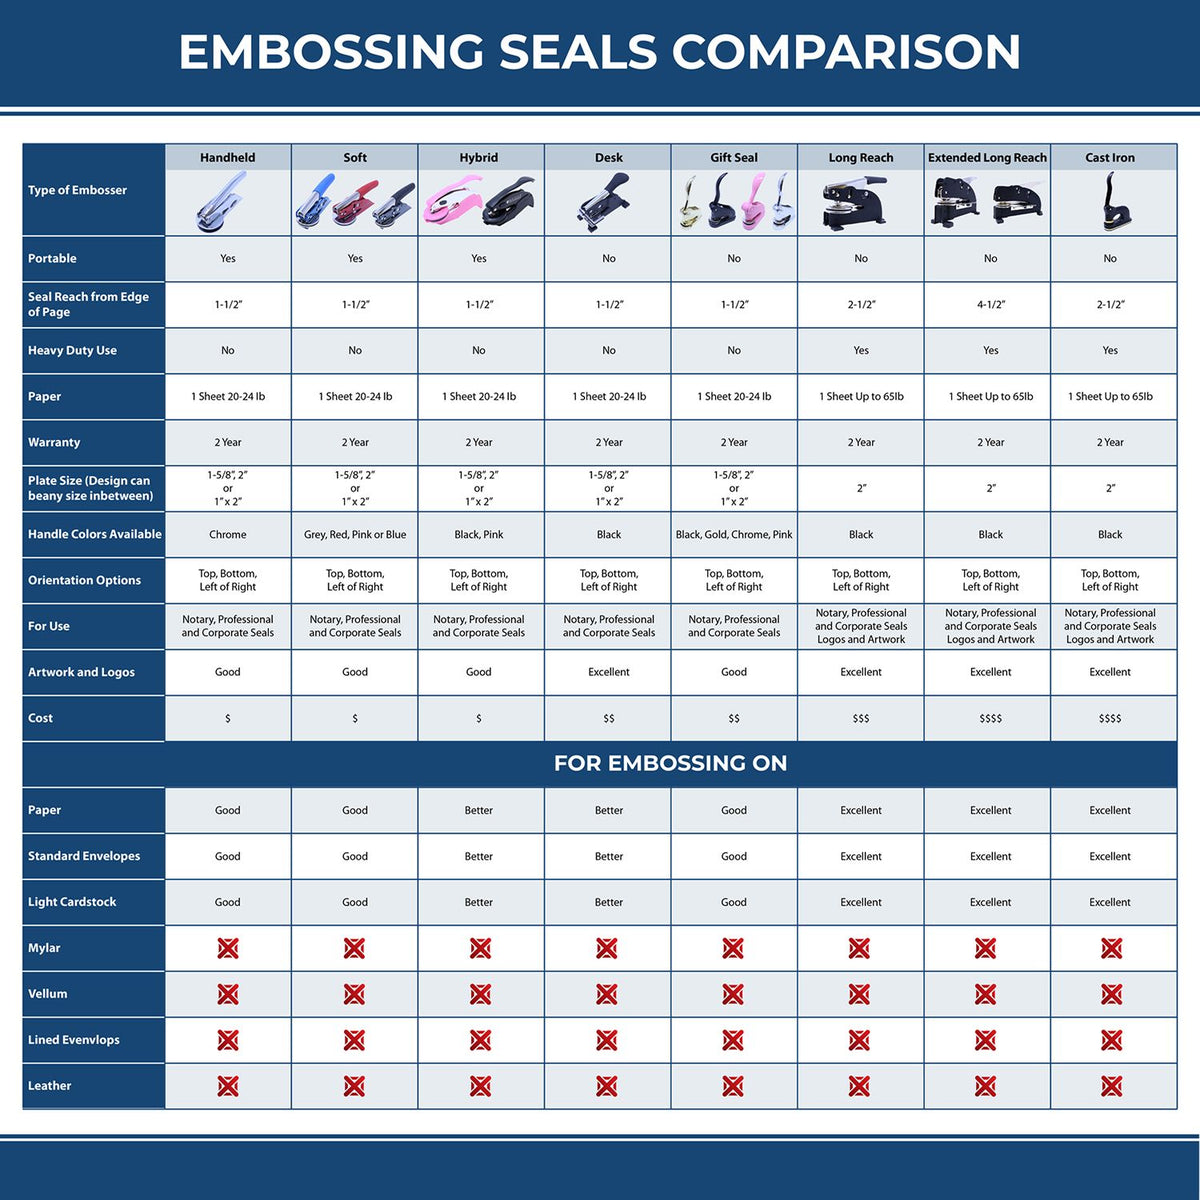 A comparison chart for the different types of mount models available for the Hybrid Tennessee Engineer Seal